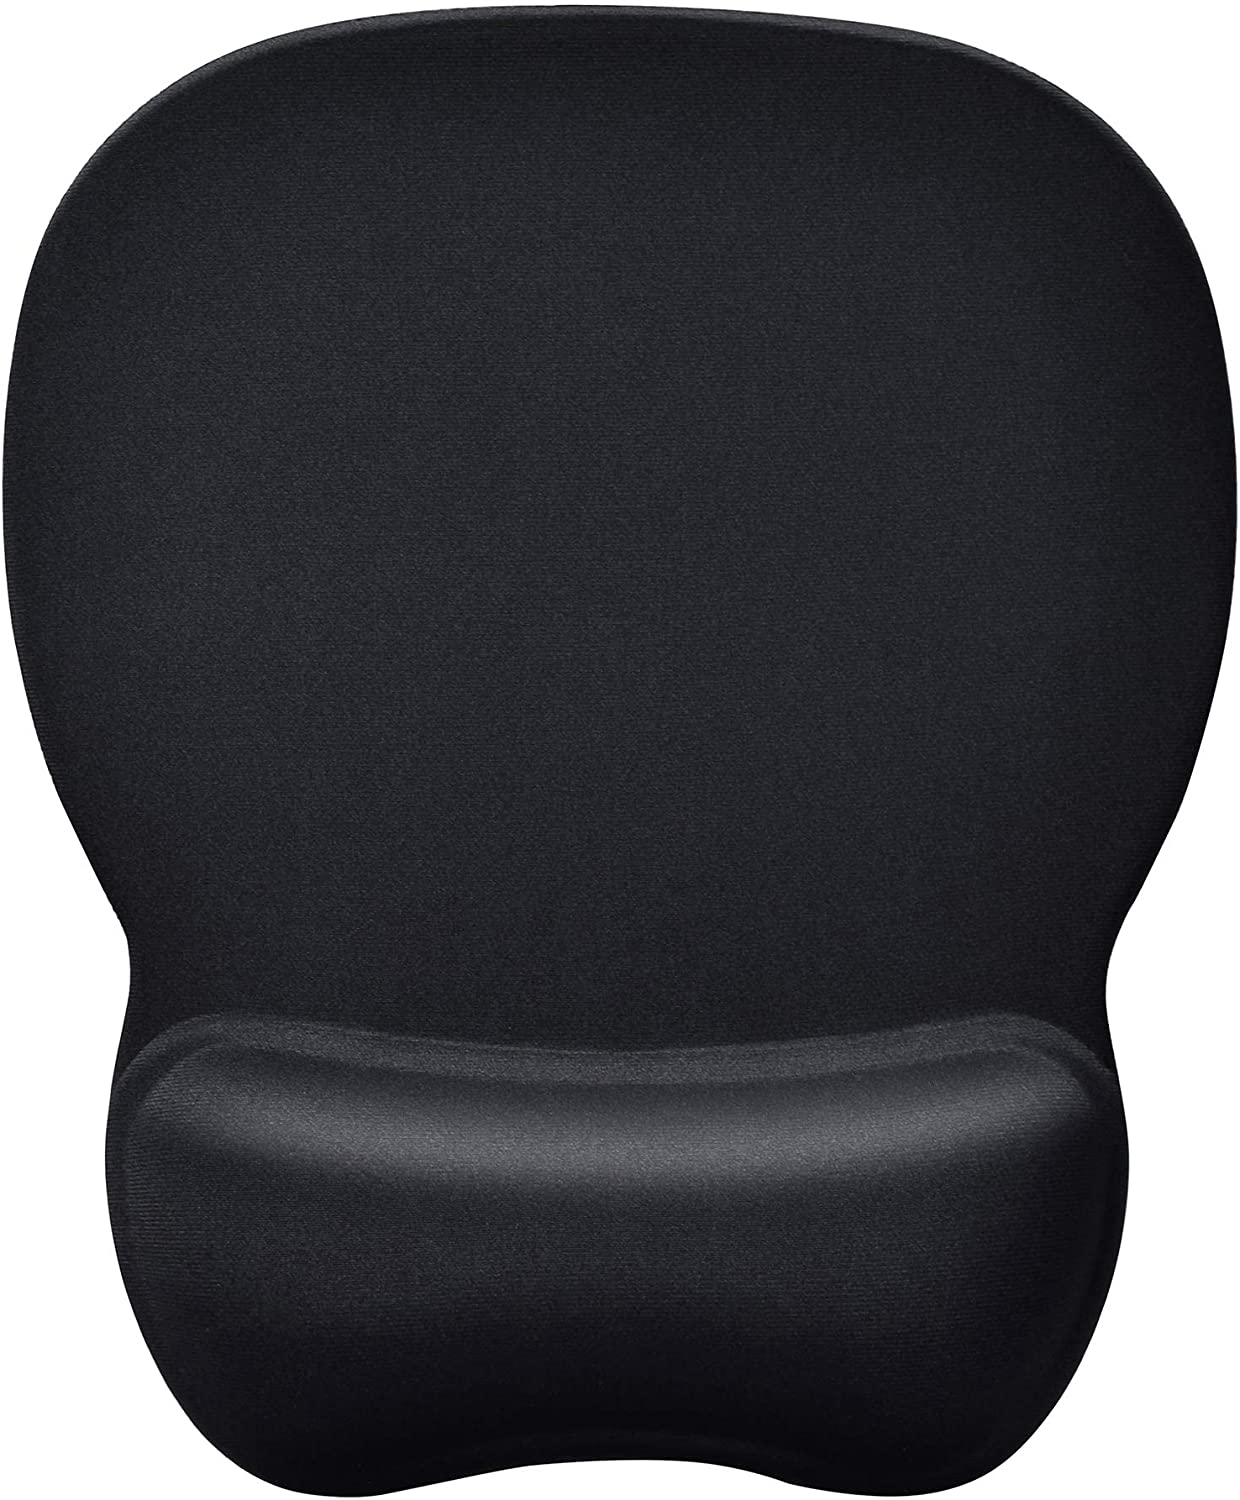 Ergonomic Mouse Pad with Gel Wrist Rest Comfortable by MROCO